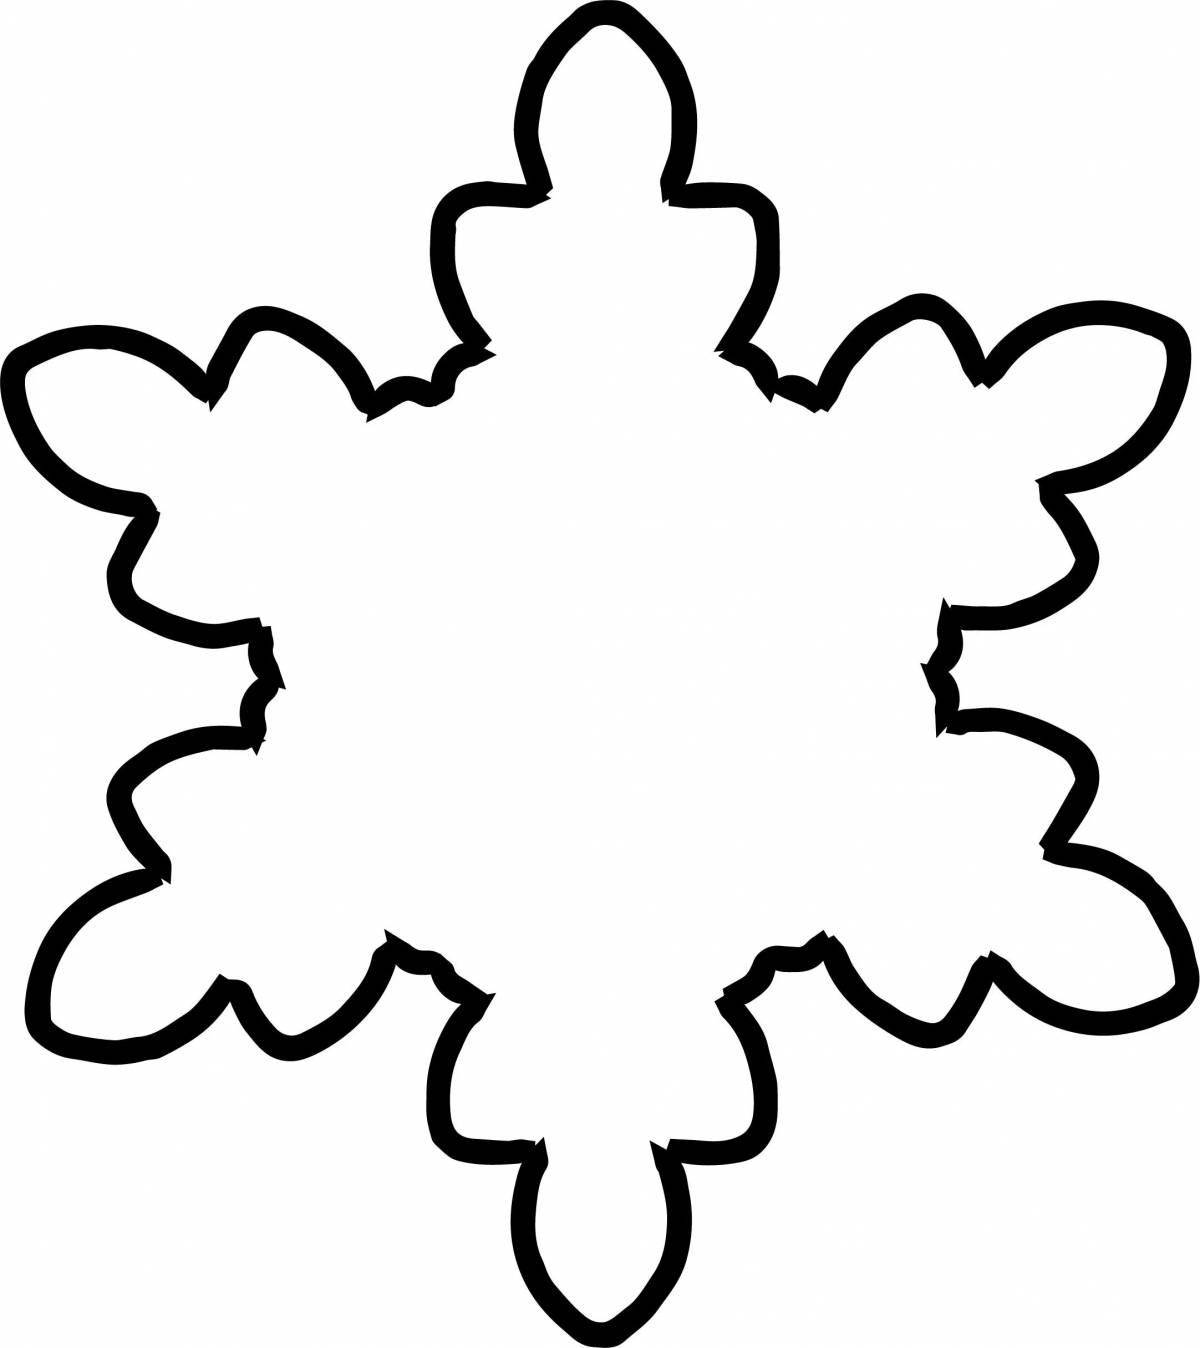 Fabulous coloring pages of snowflakes for children 4-5 years old